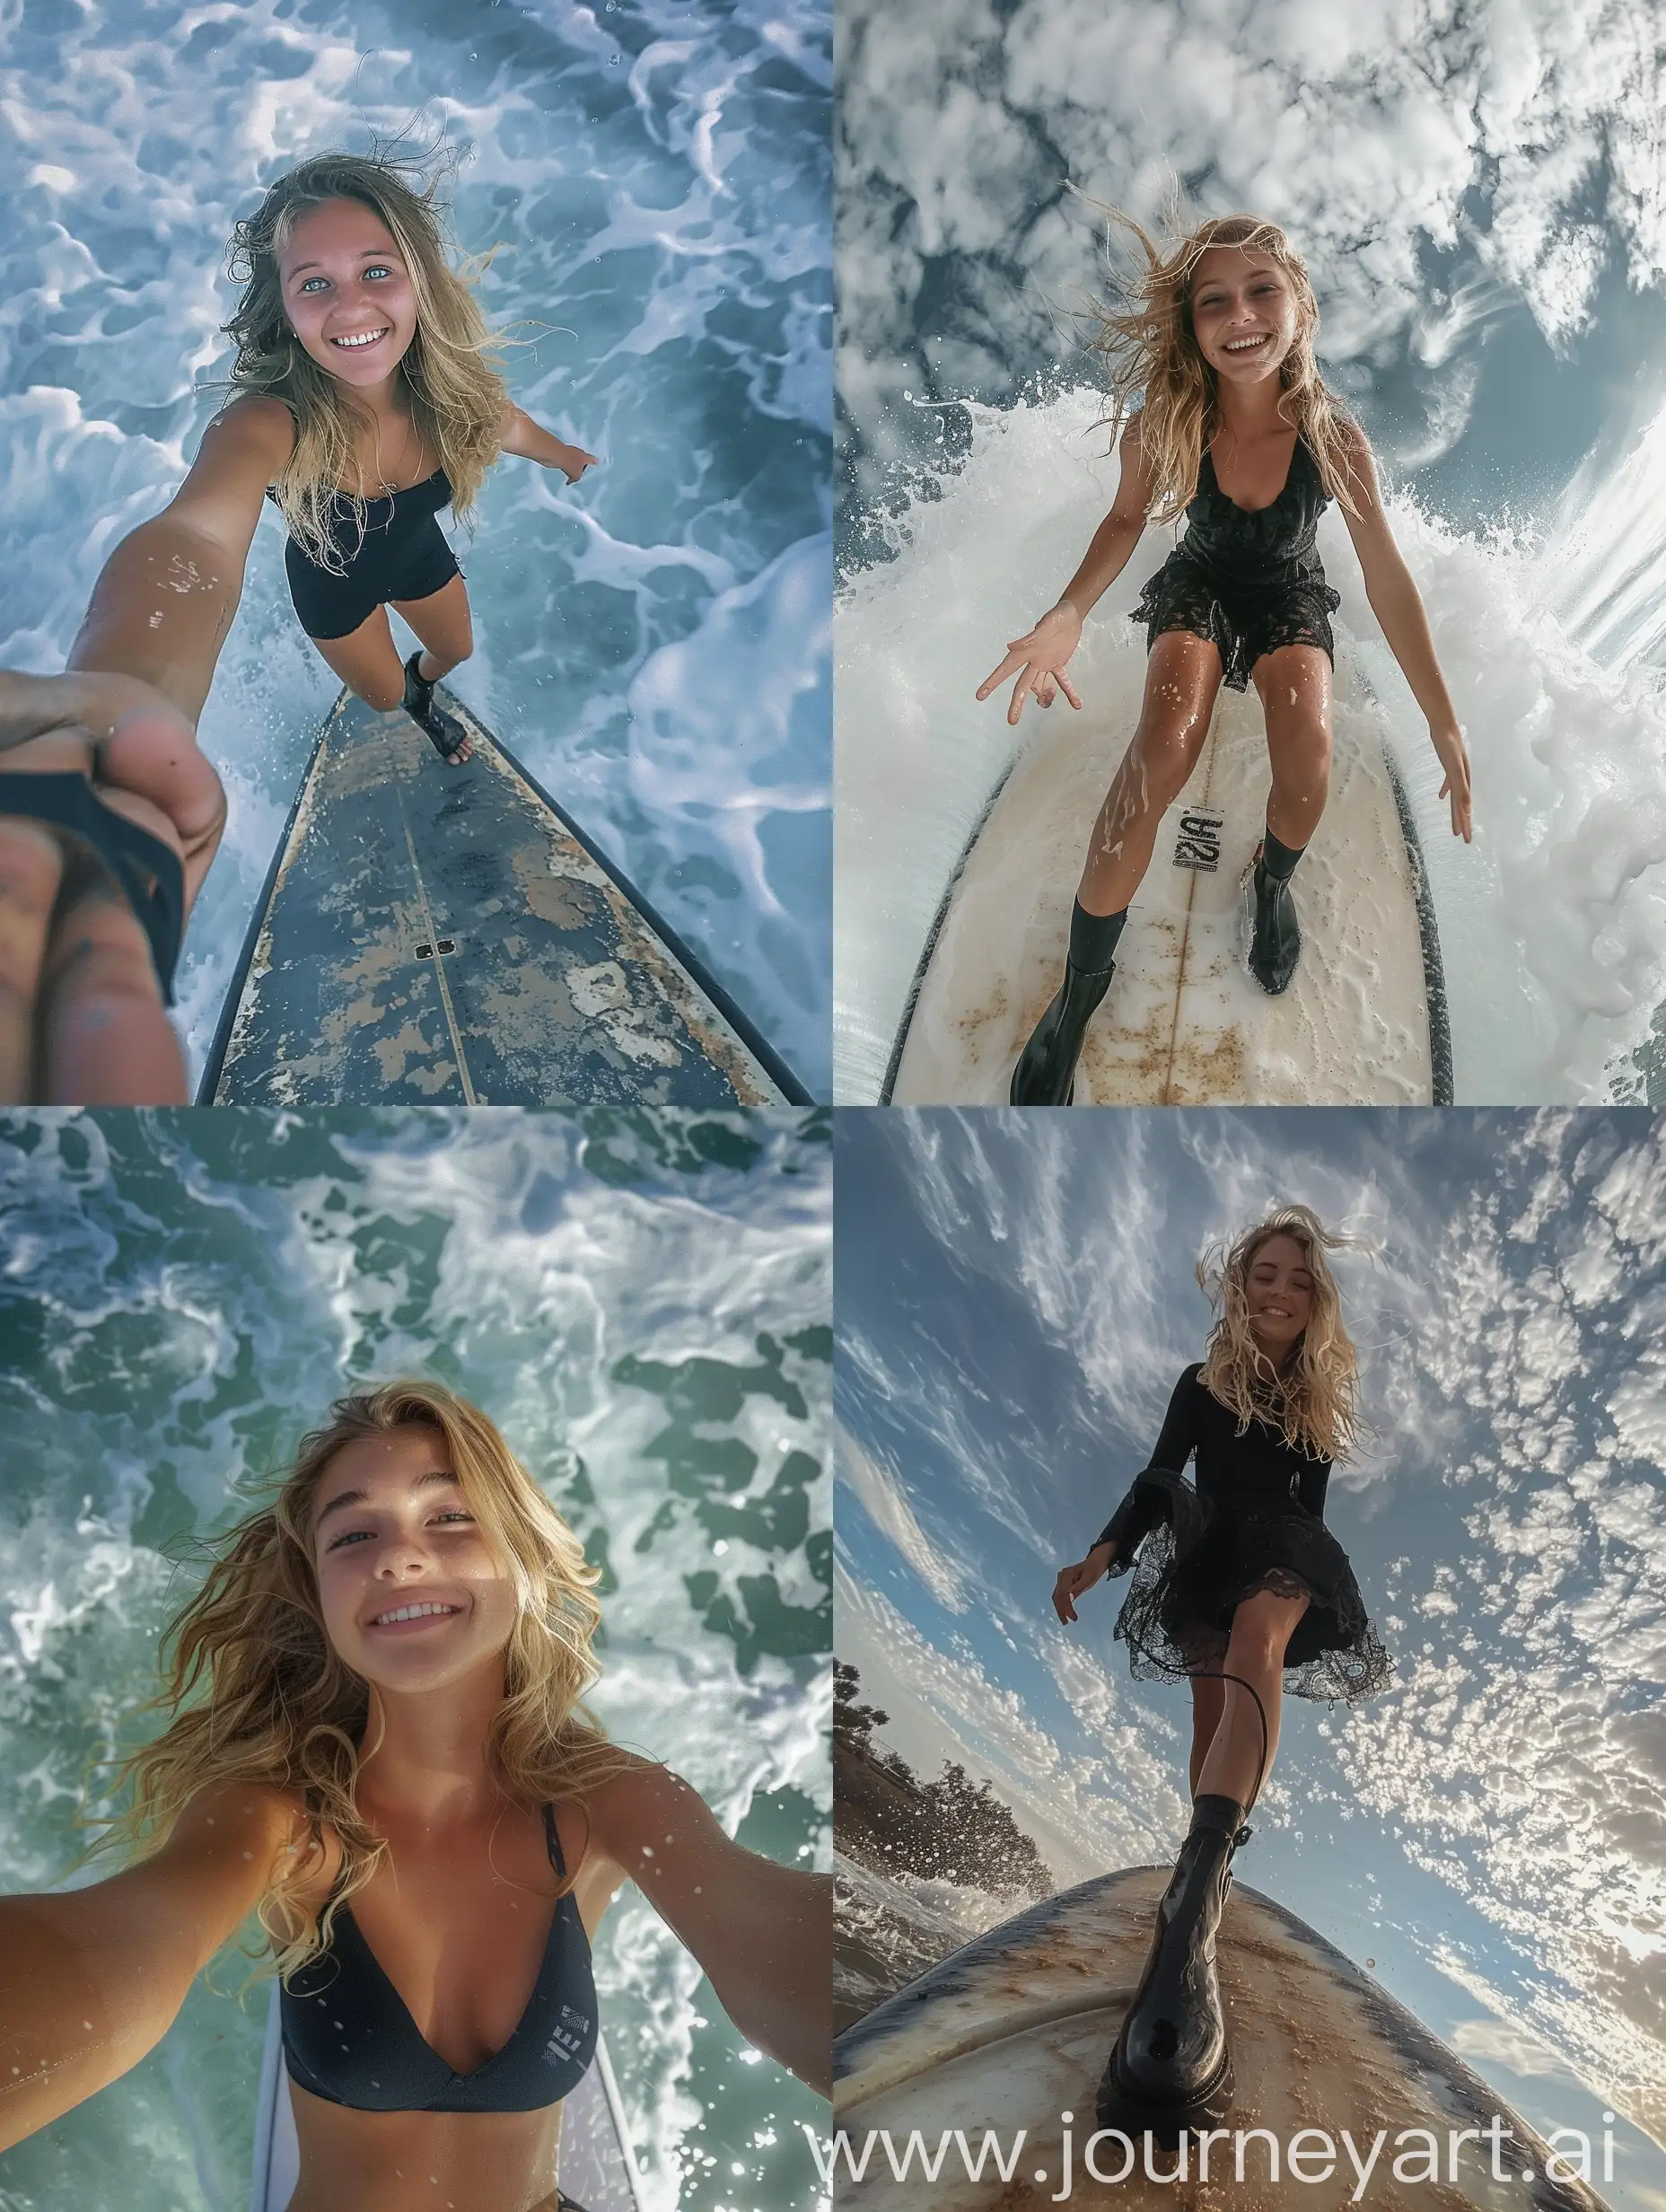 Young-Woman-in-Black-Dress-Smiling-while-Surfing-Selfie